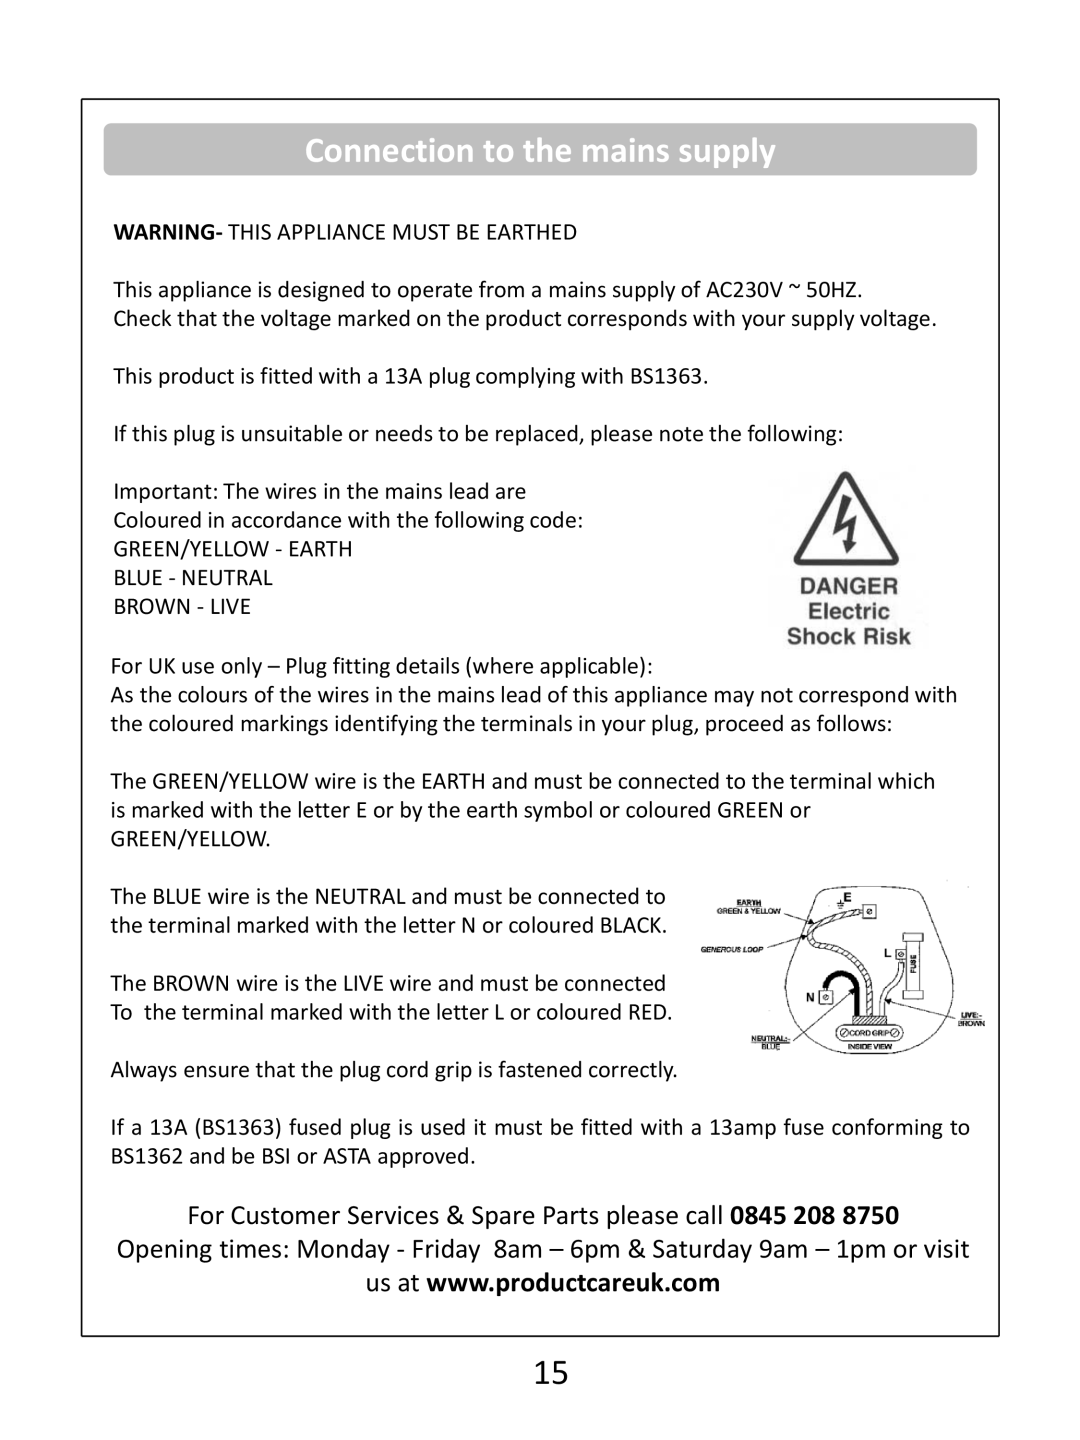 Russell Hobbs RHCF150 instruction manual Connection to the mains supply 